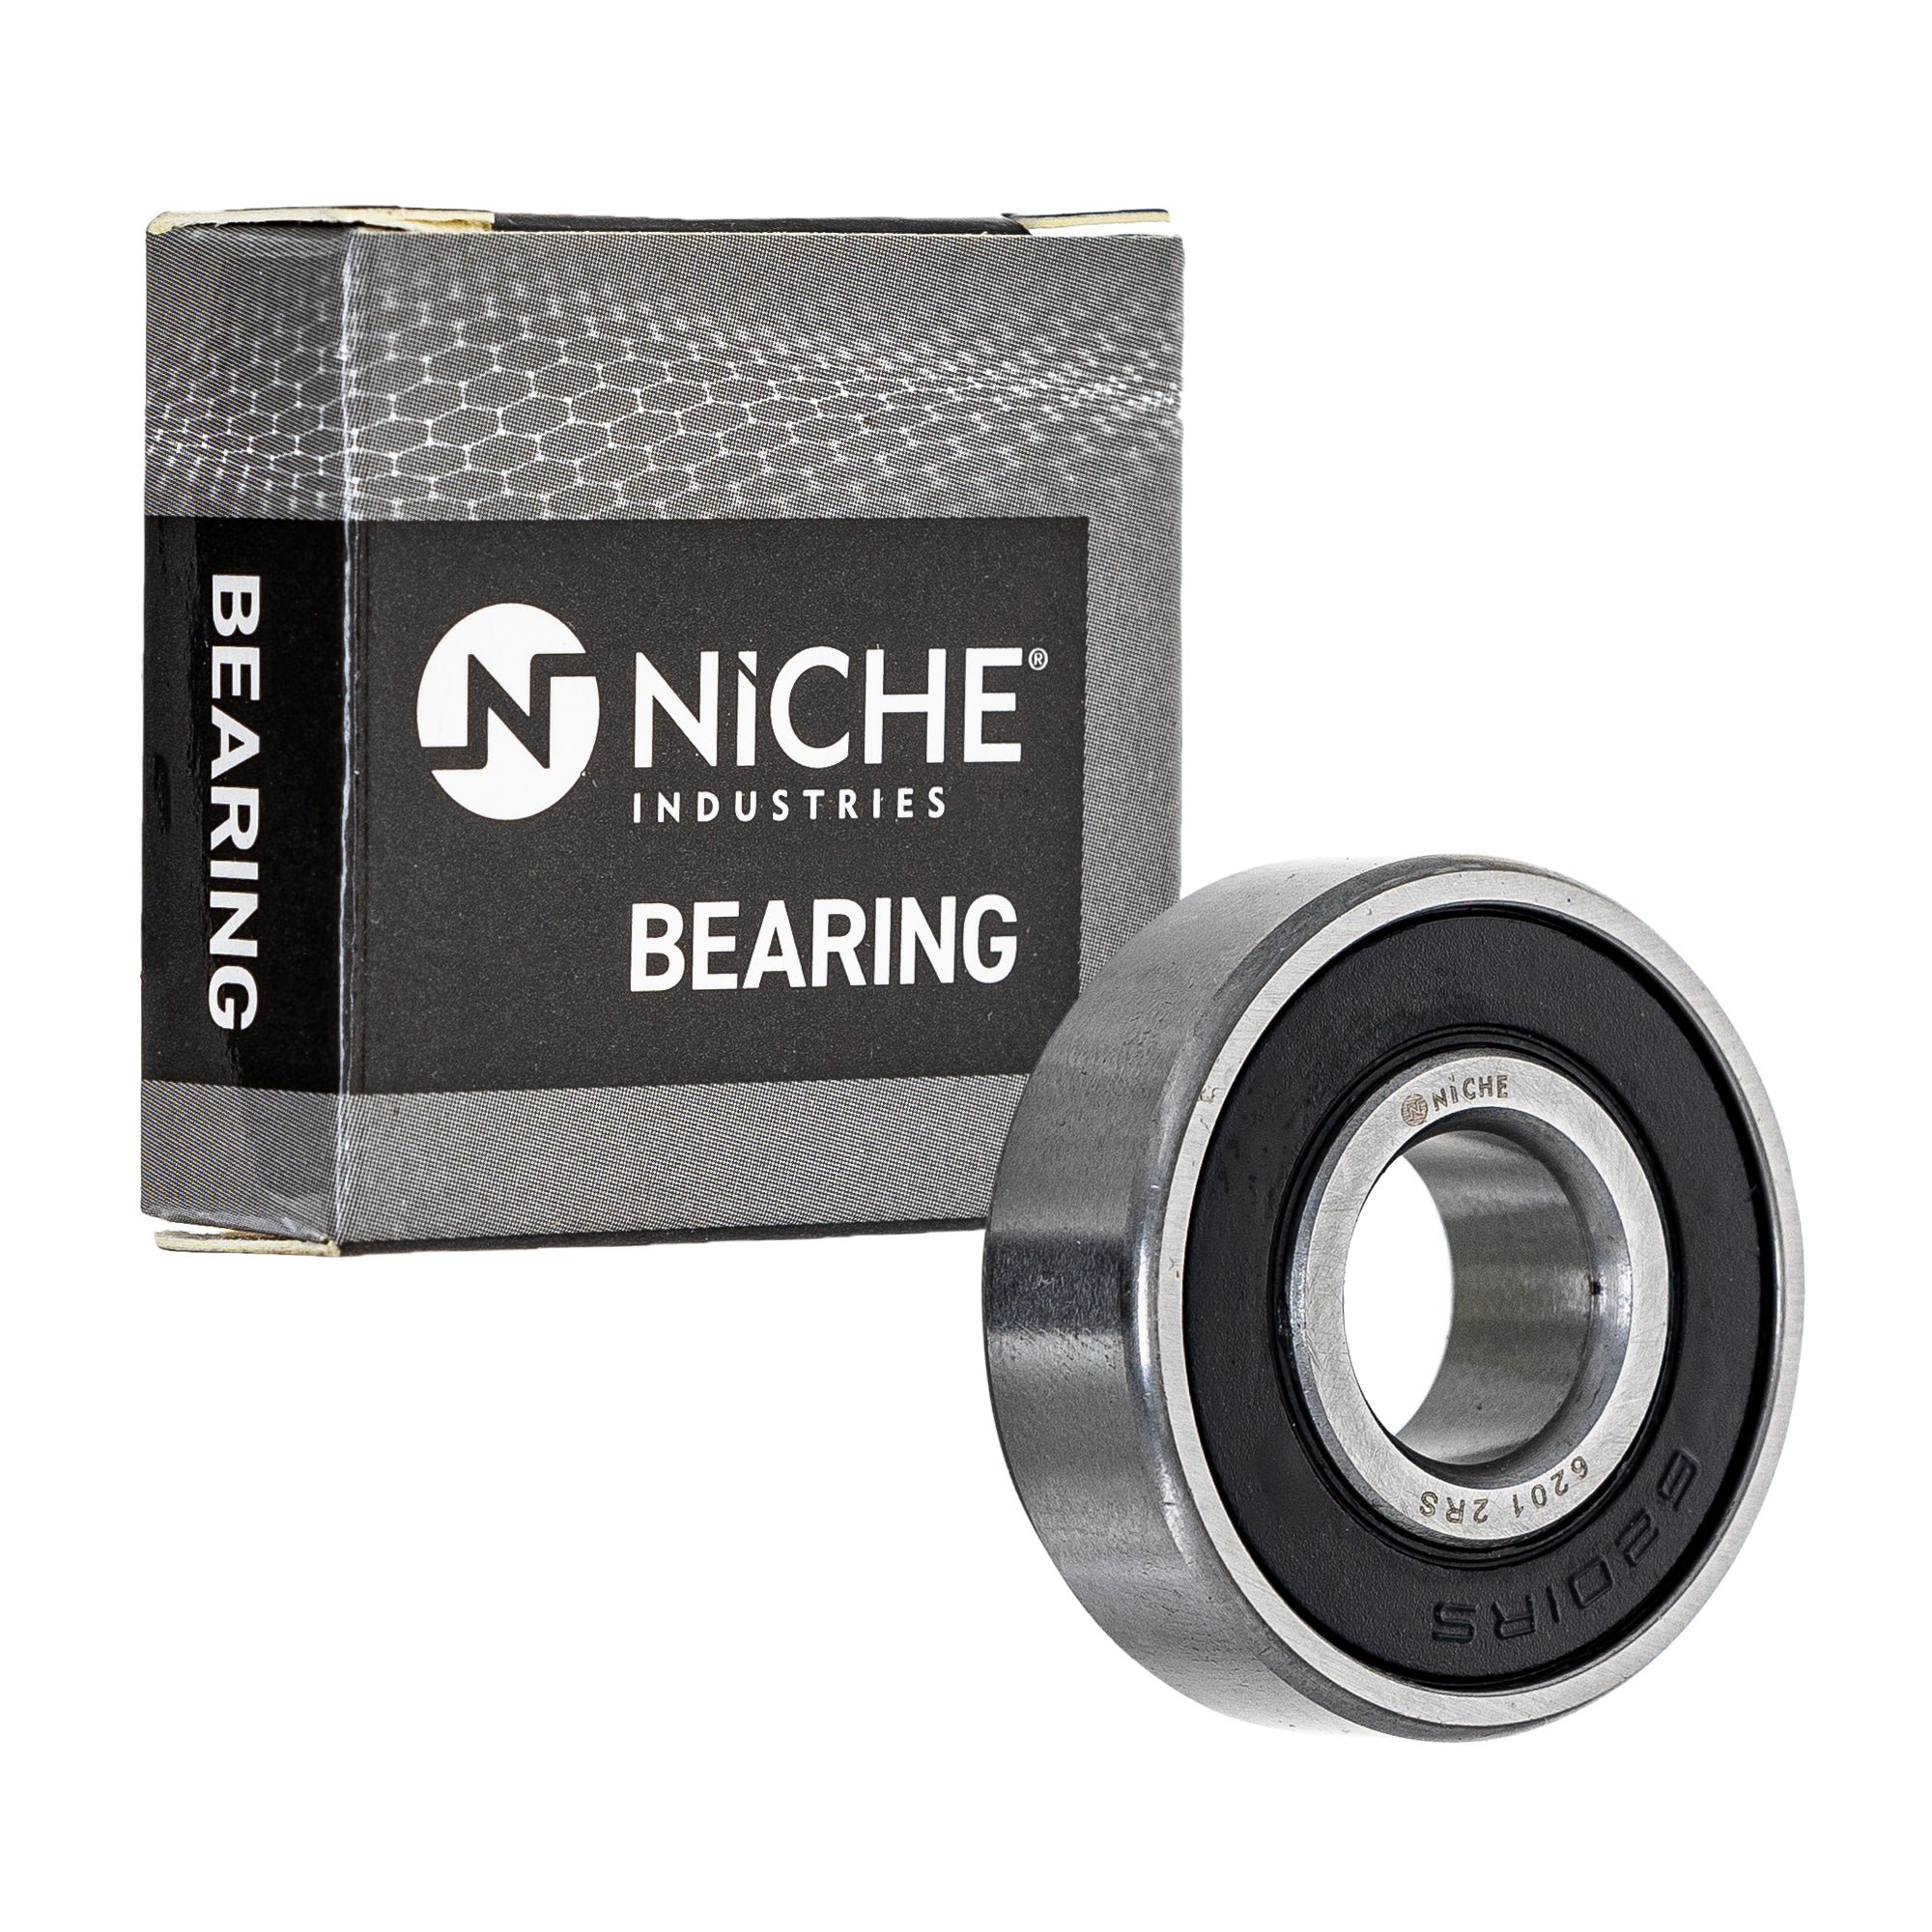 NICHE 519-CBB2247R Bearing 2-Pack for zOTHER YZ85 YZ65 XR80R XR80